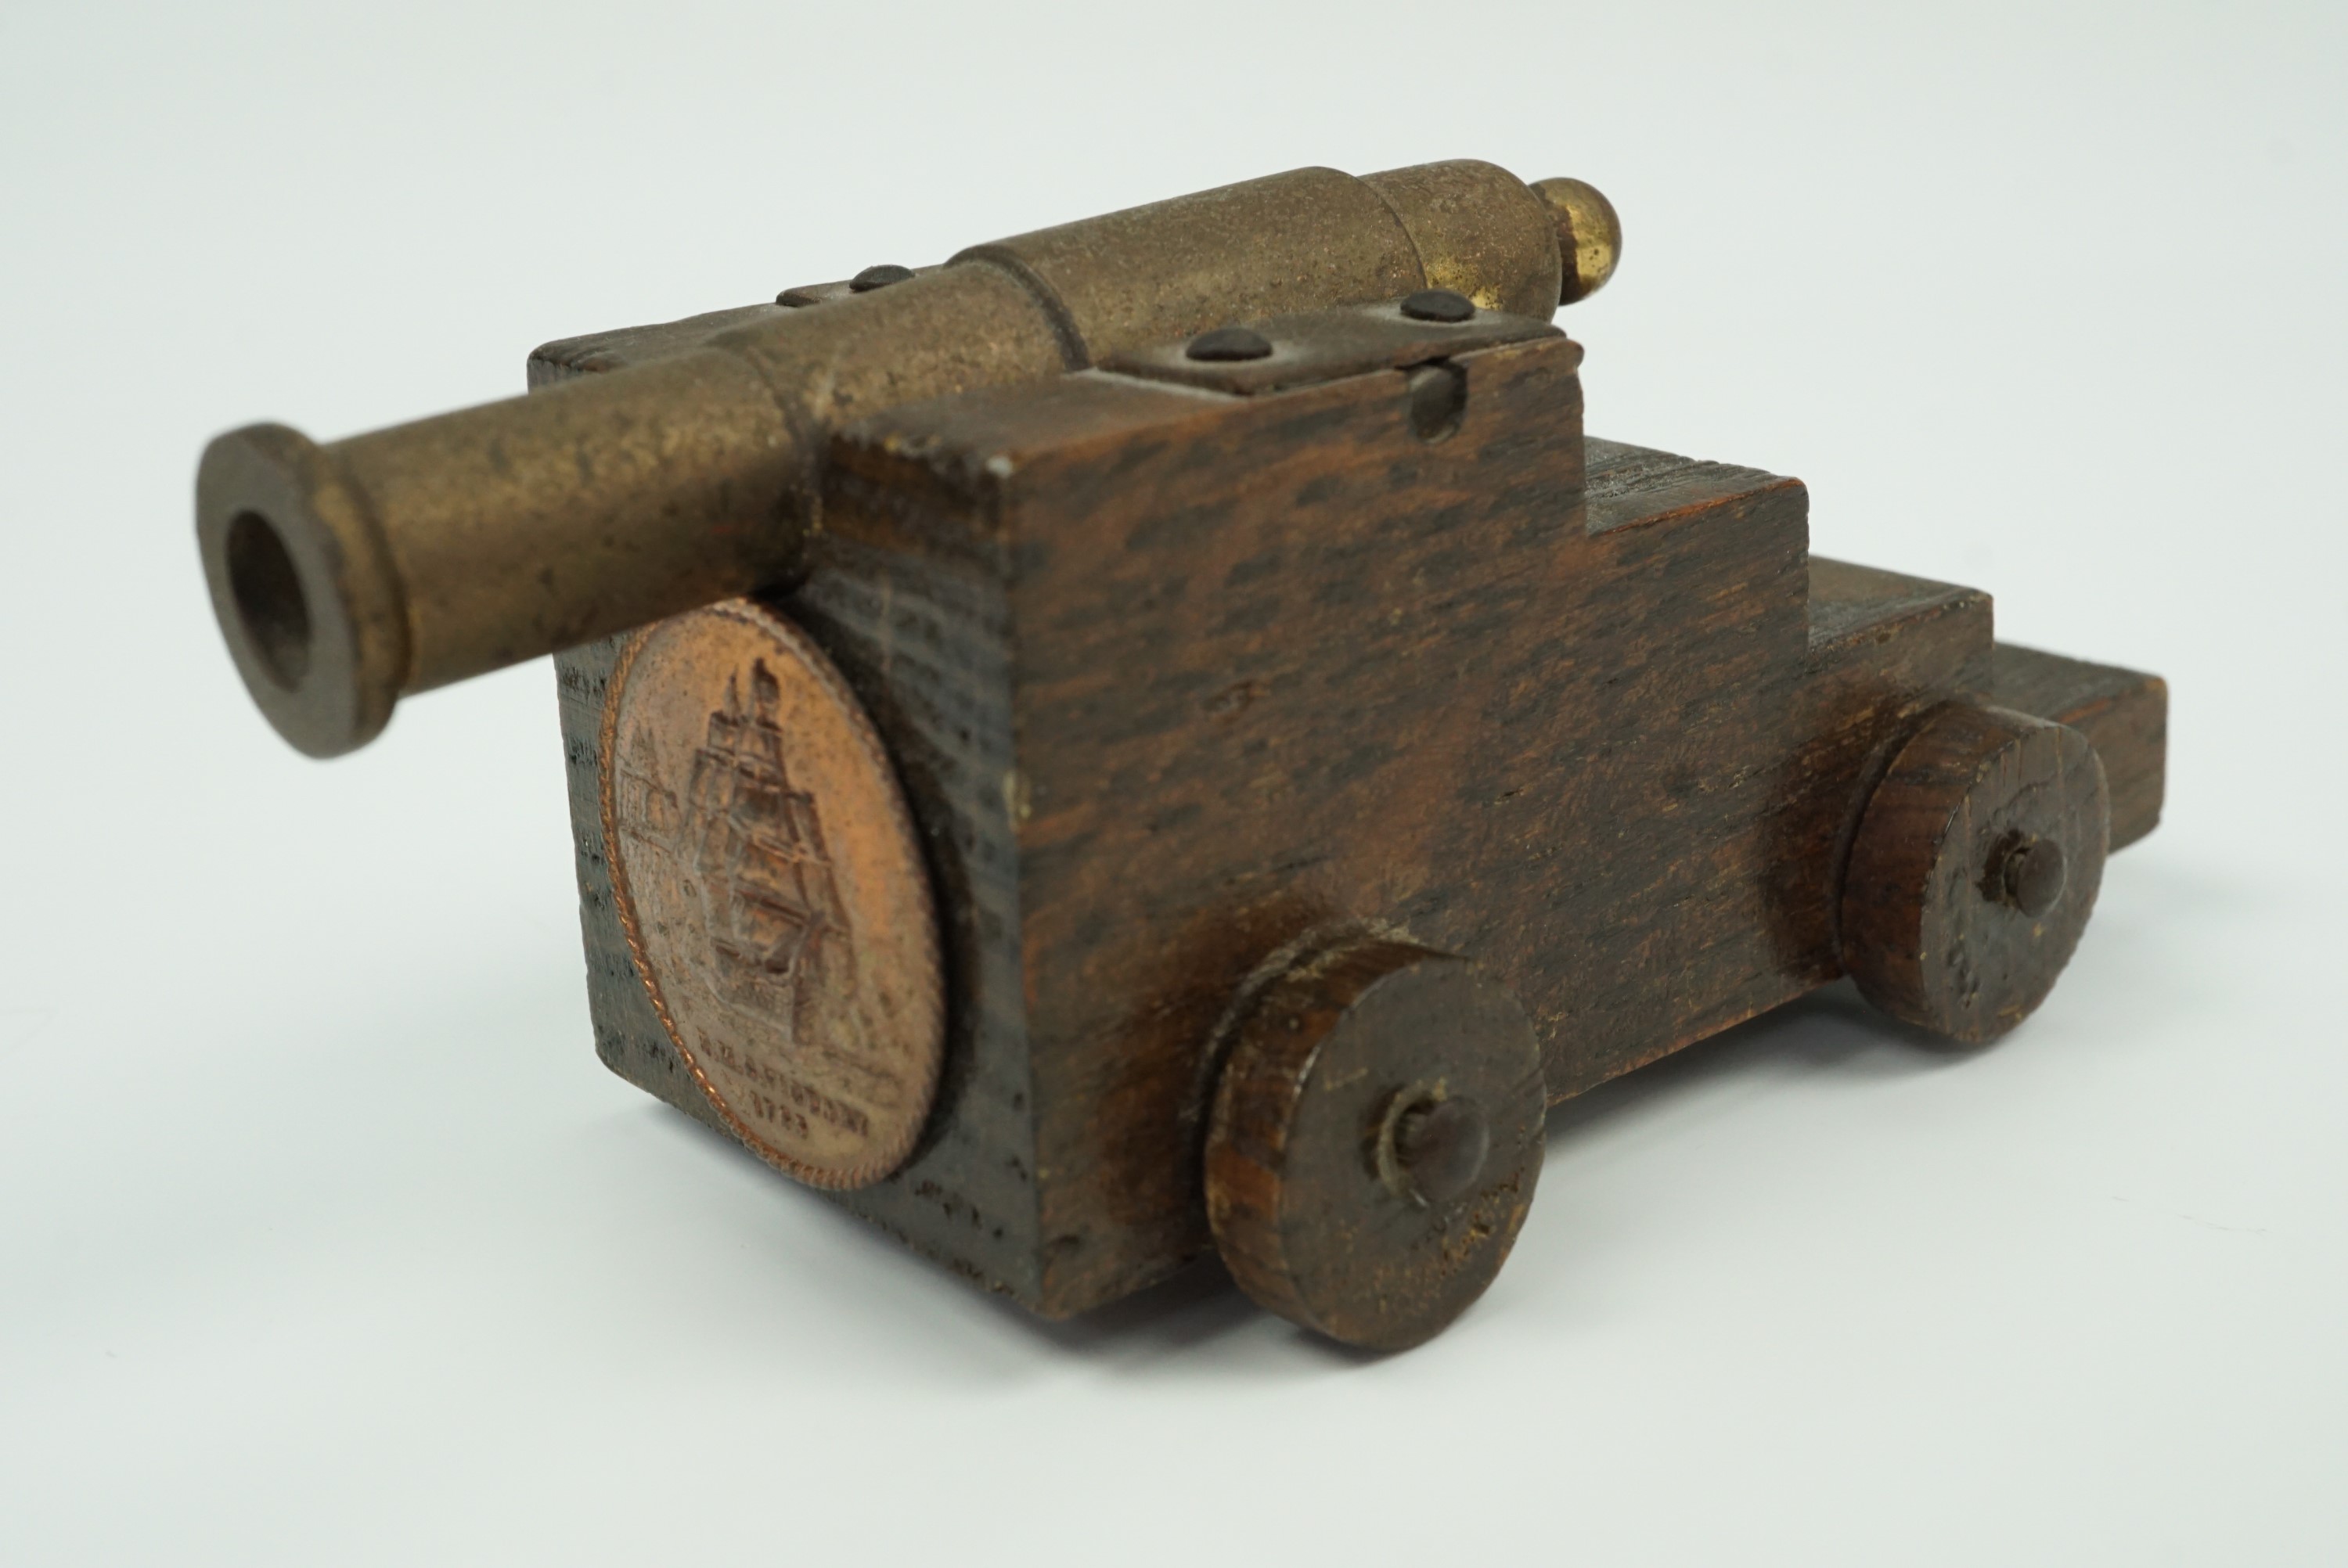 A small model naval canon, its truck bearing a copper plaque with the legend "HMS Victory, 1765" and